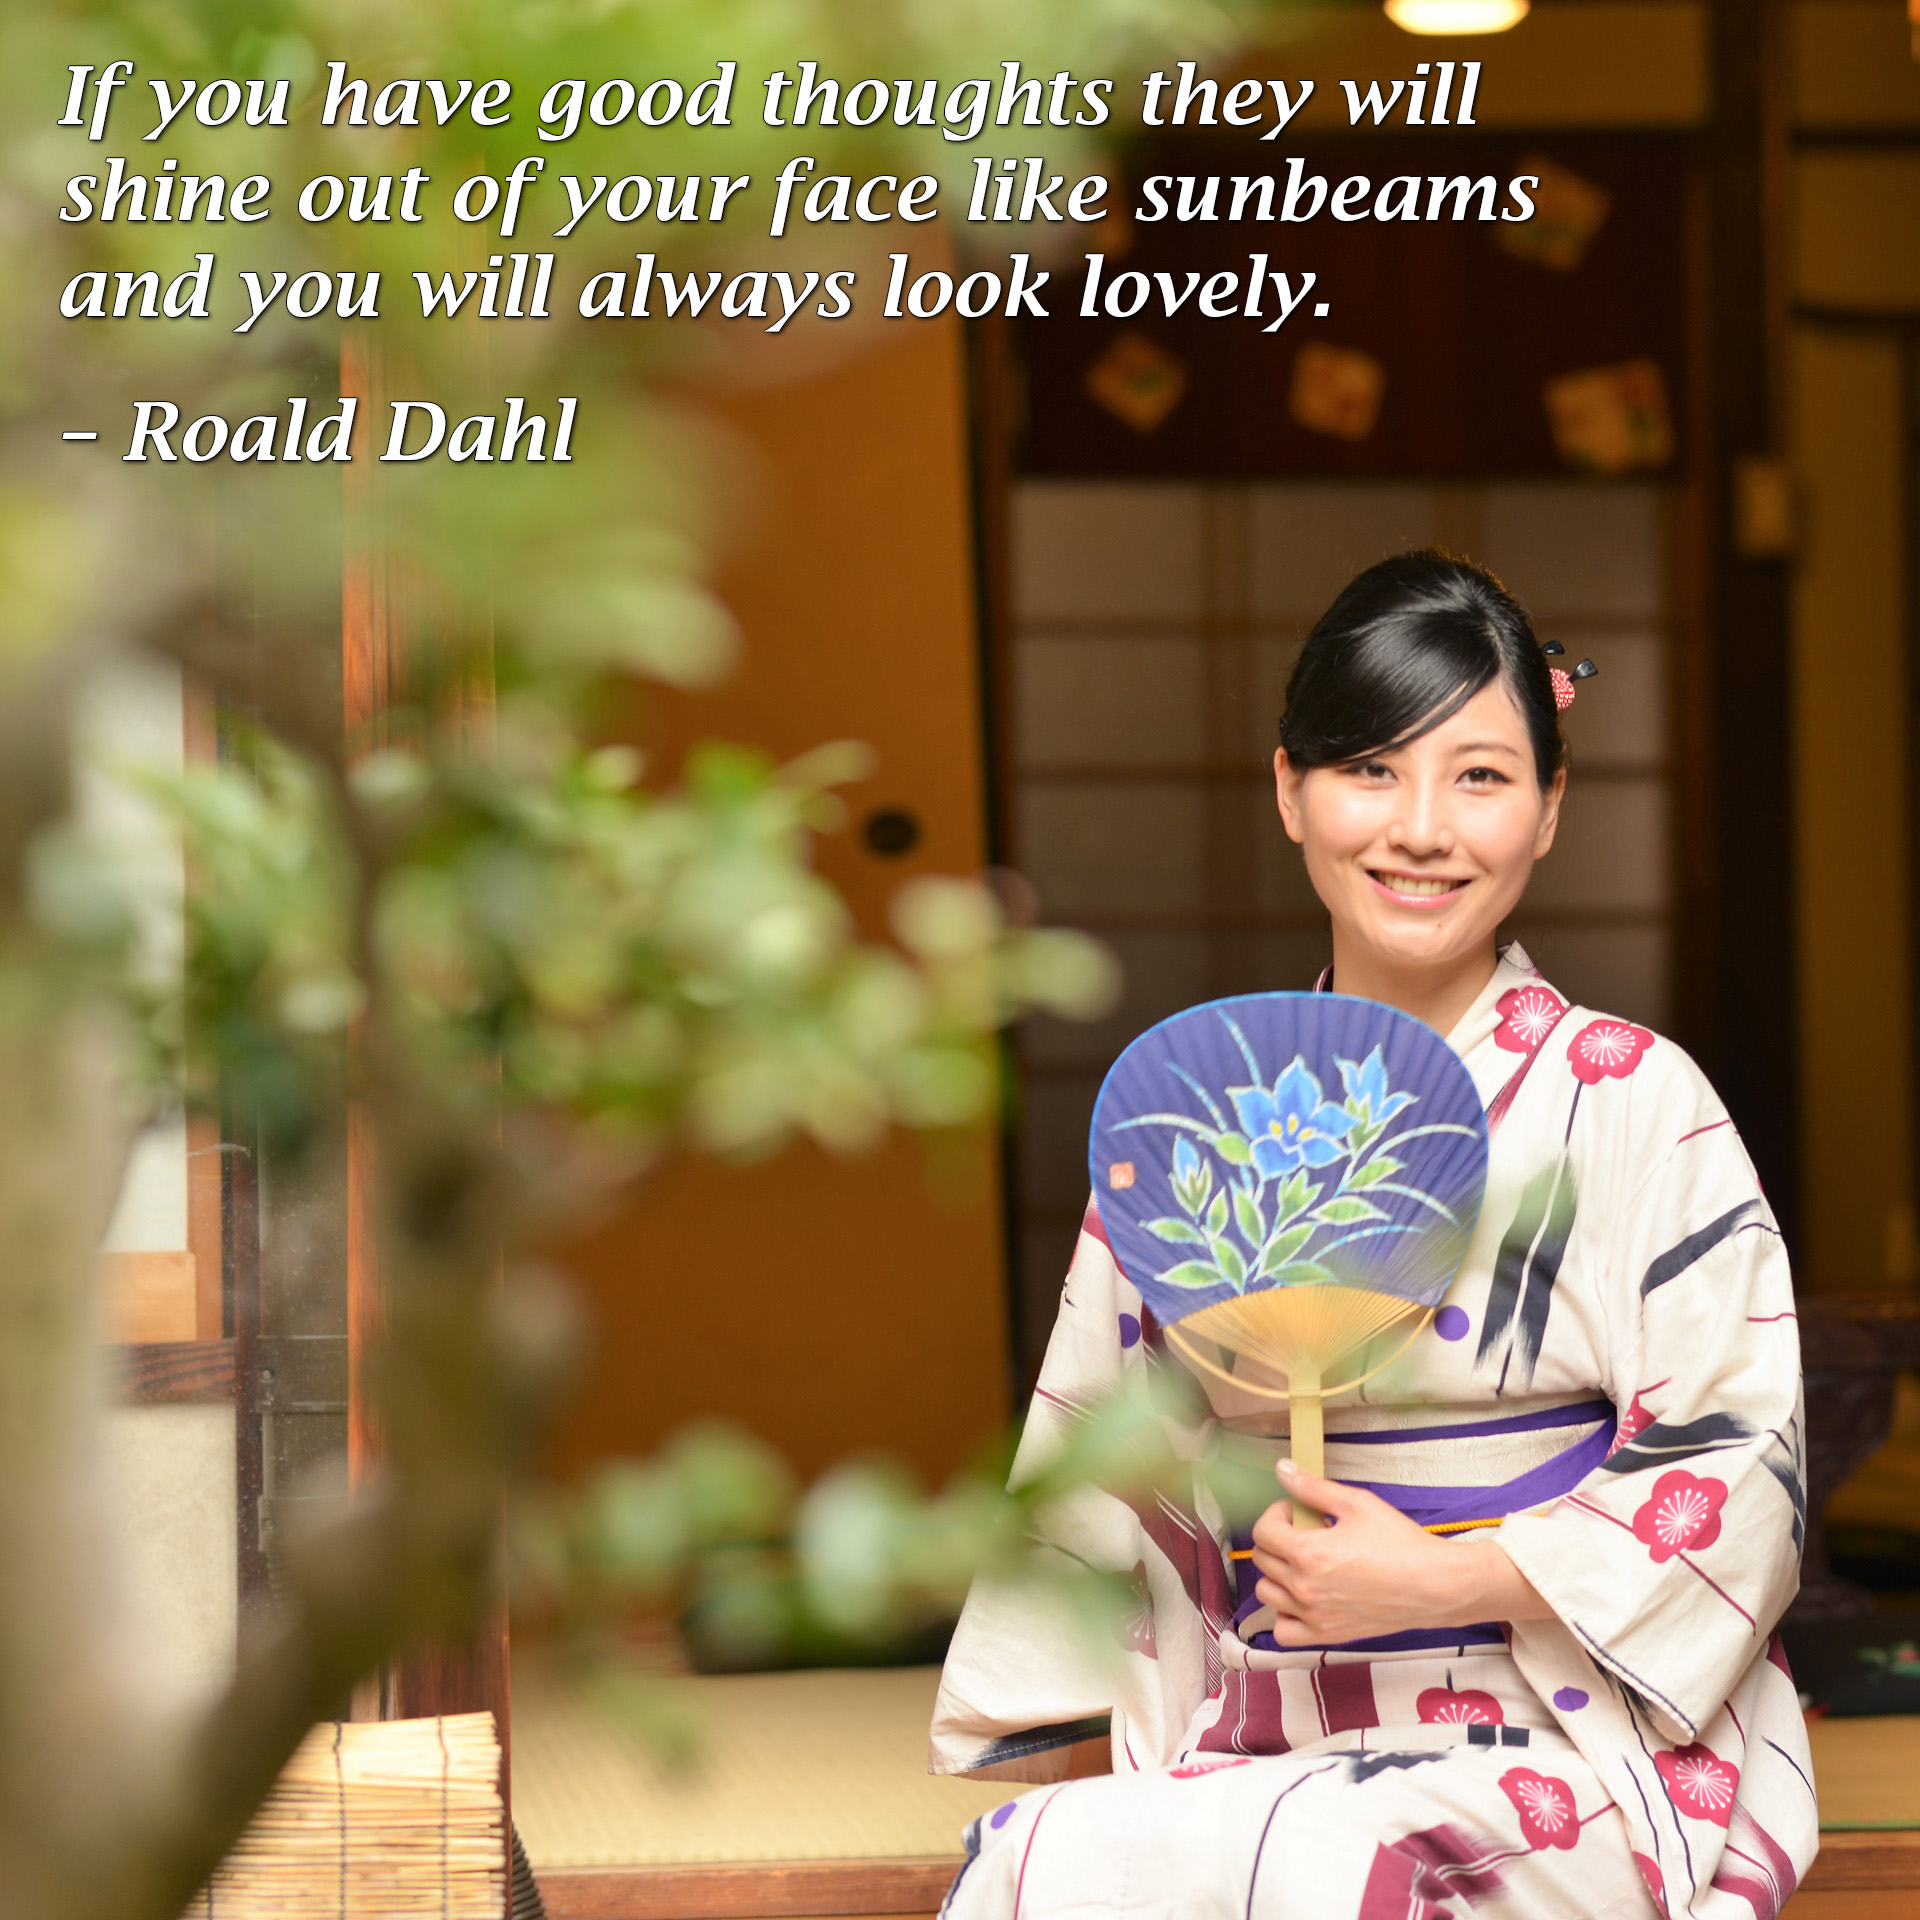 If you have good thoughts they will shine out of your face like sunbeams and you will always look lovely. - Roald Dahl